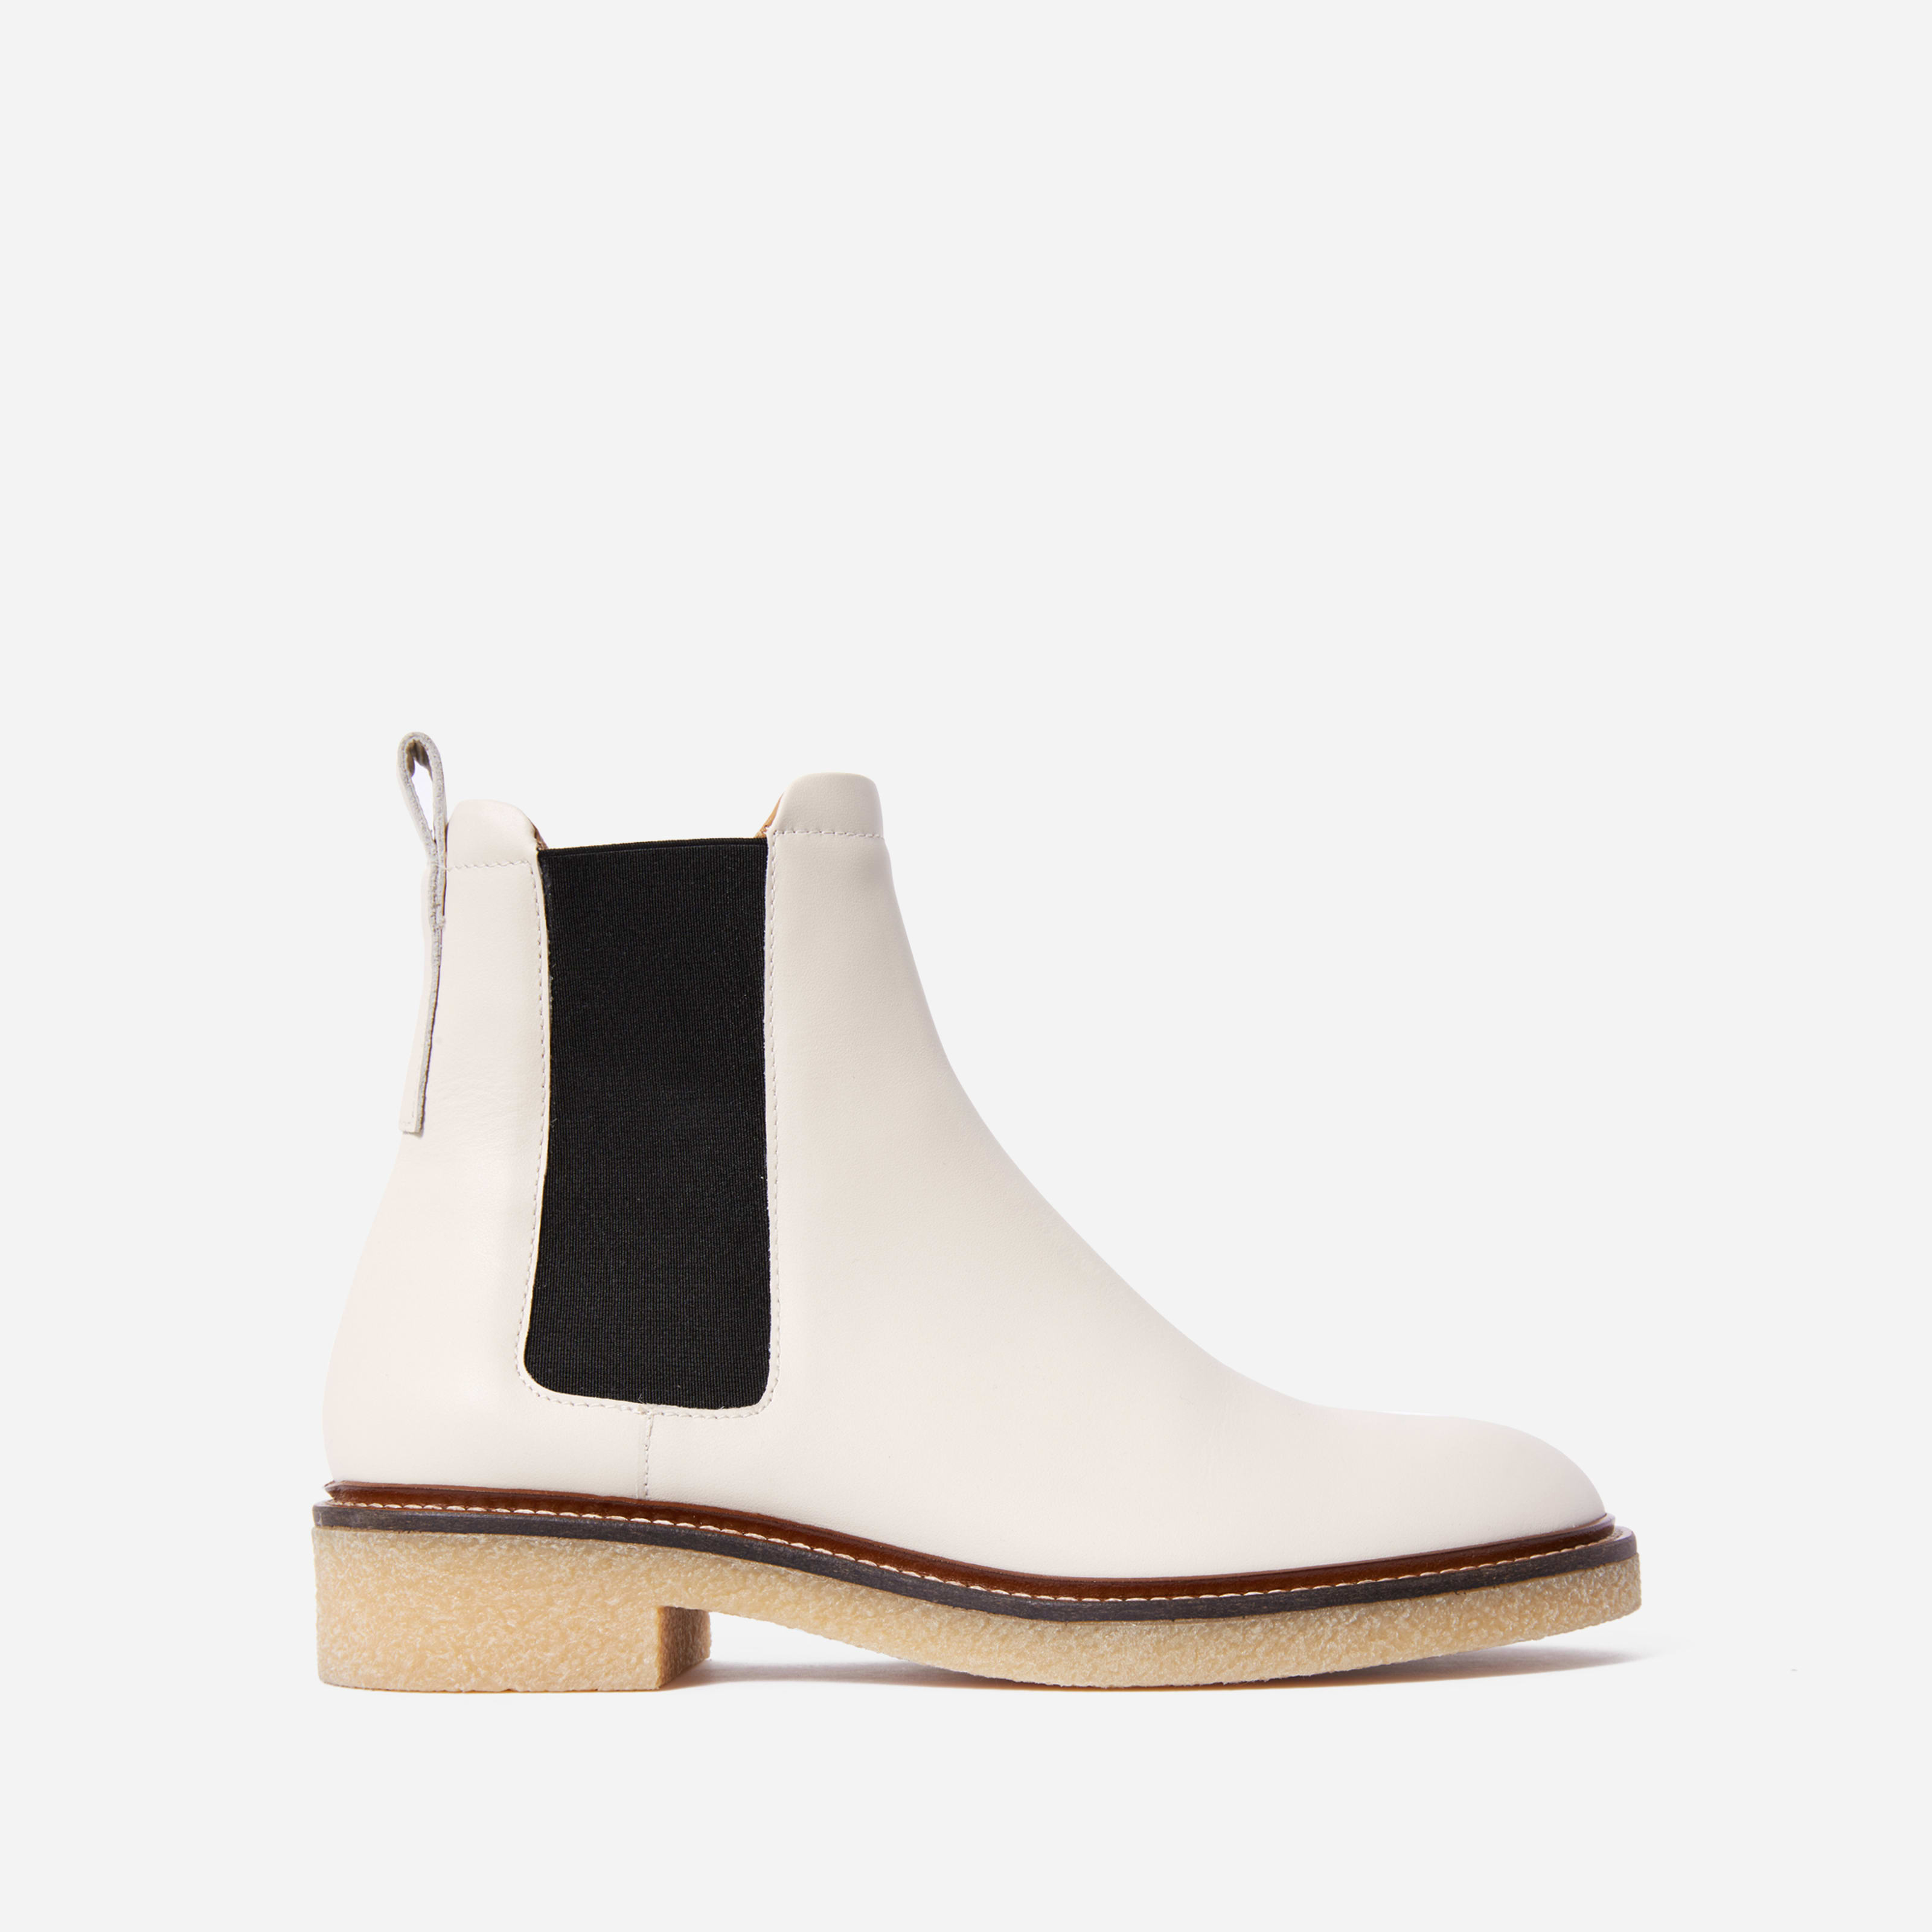 Chelsea Boot By Everlane In Off White, Size 5